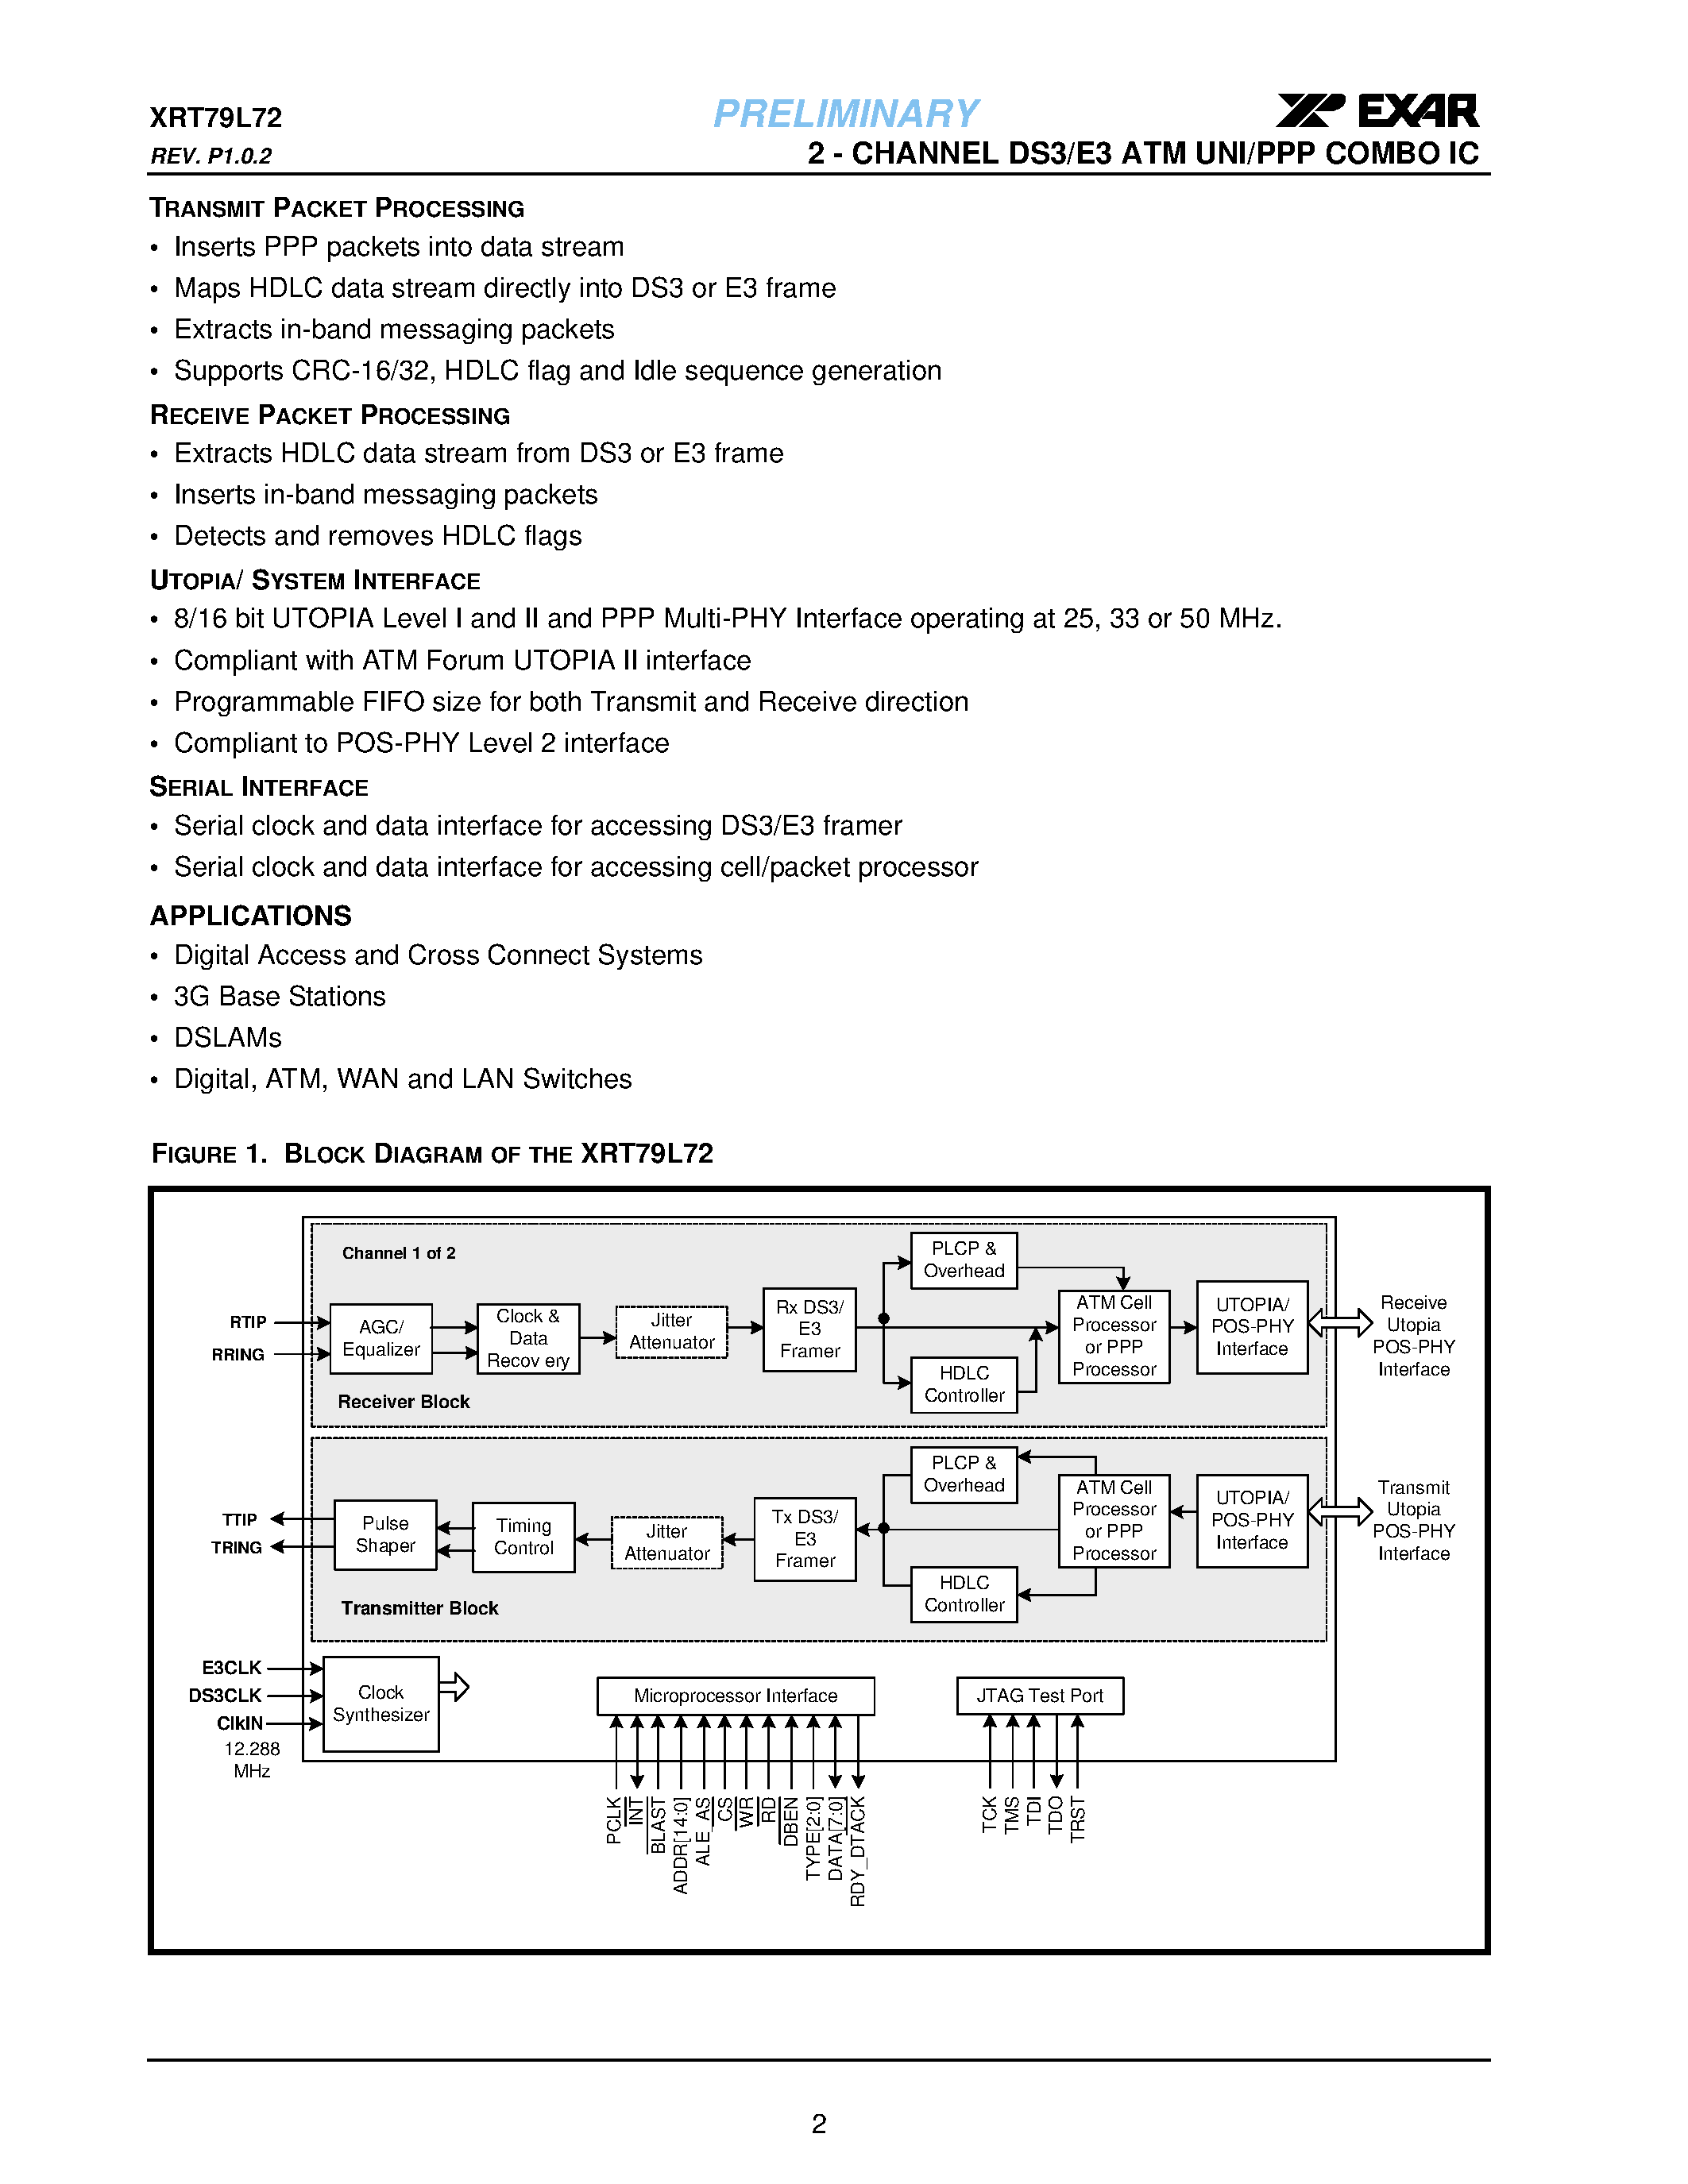 Datasheet XRT79L72 - 2-CHANNEL DS3/E3 ATM UNI/PPP COMBO IC page 2